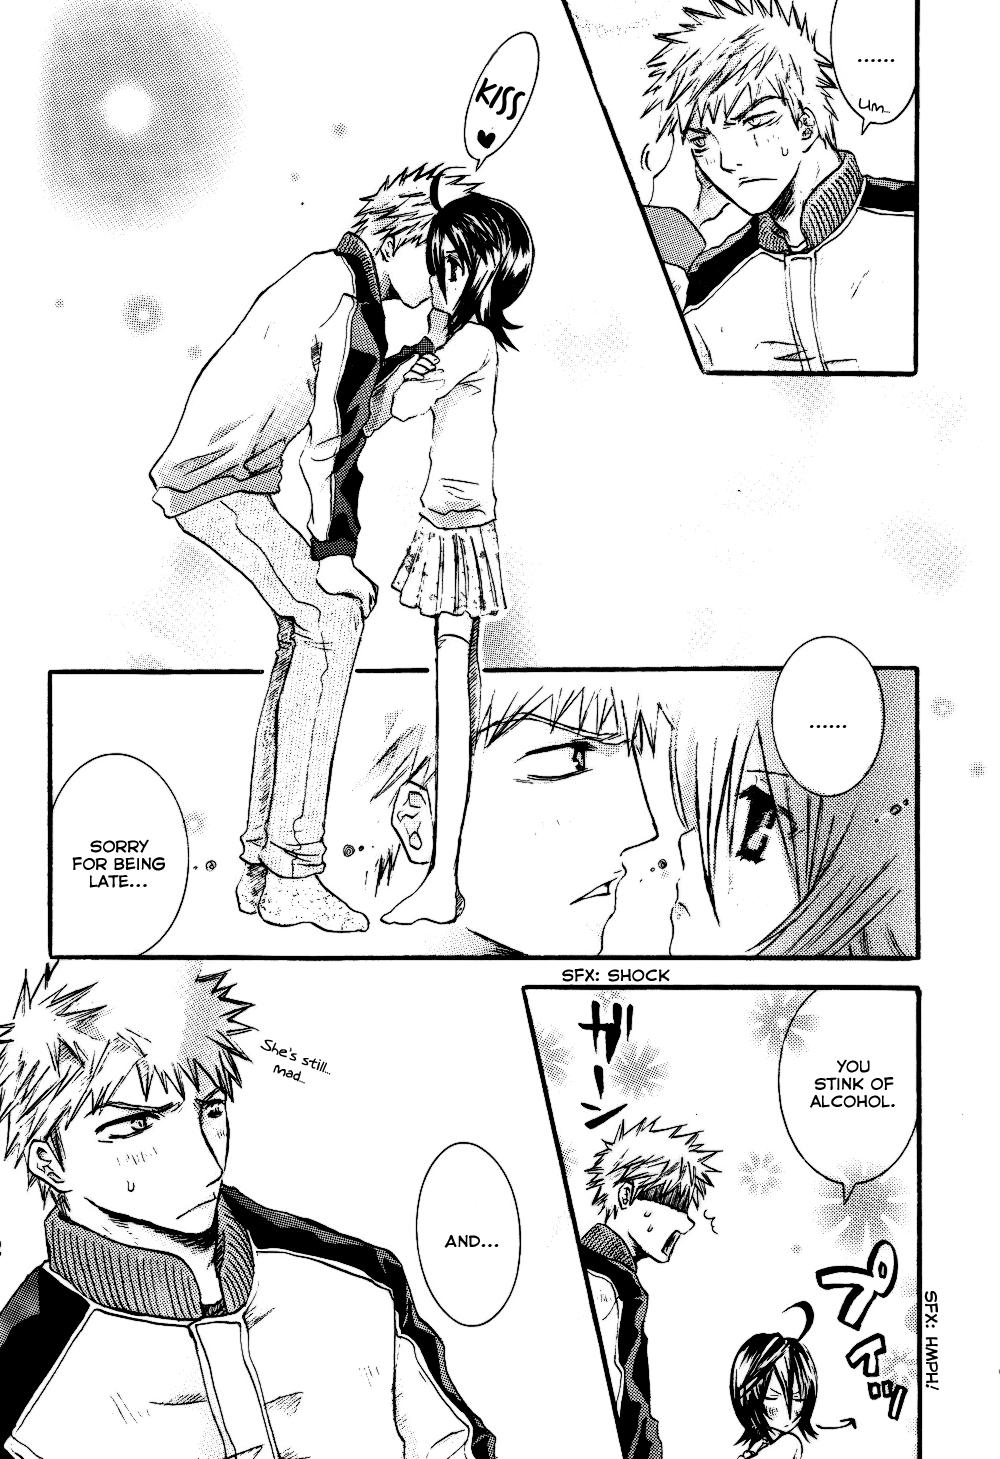 Footjob STRAWBERRY ON THE SHORTCAKE - Bleach 8teen - Page 12